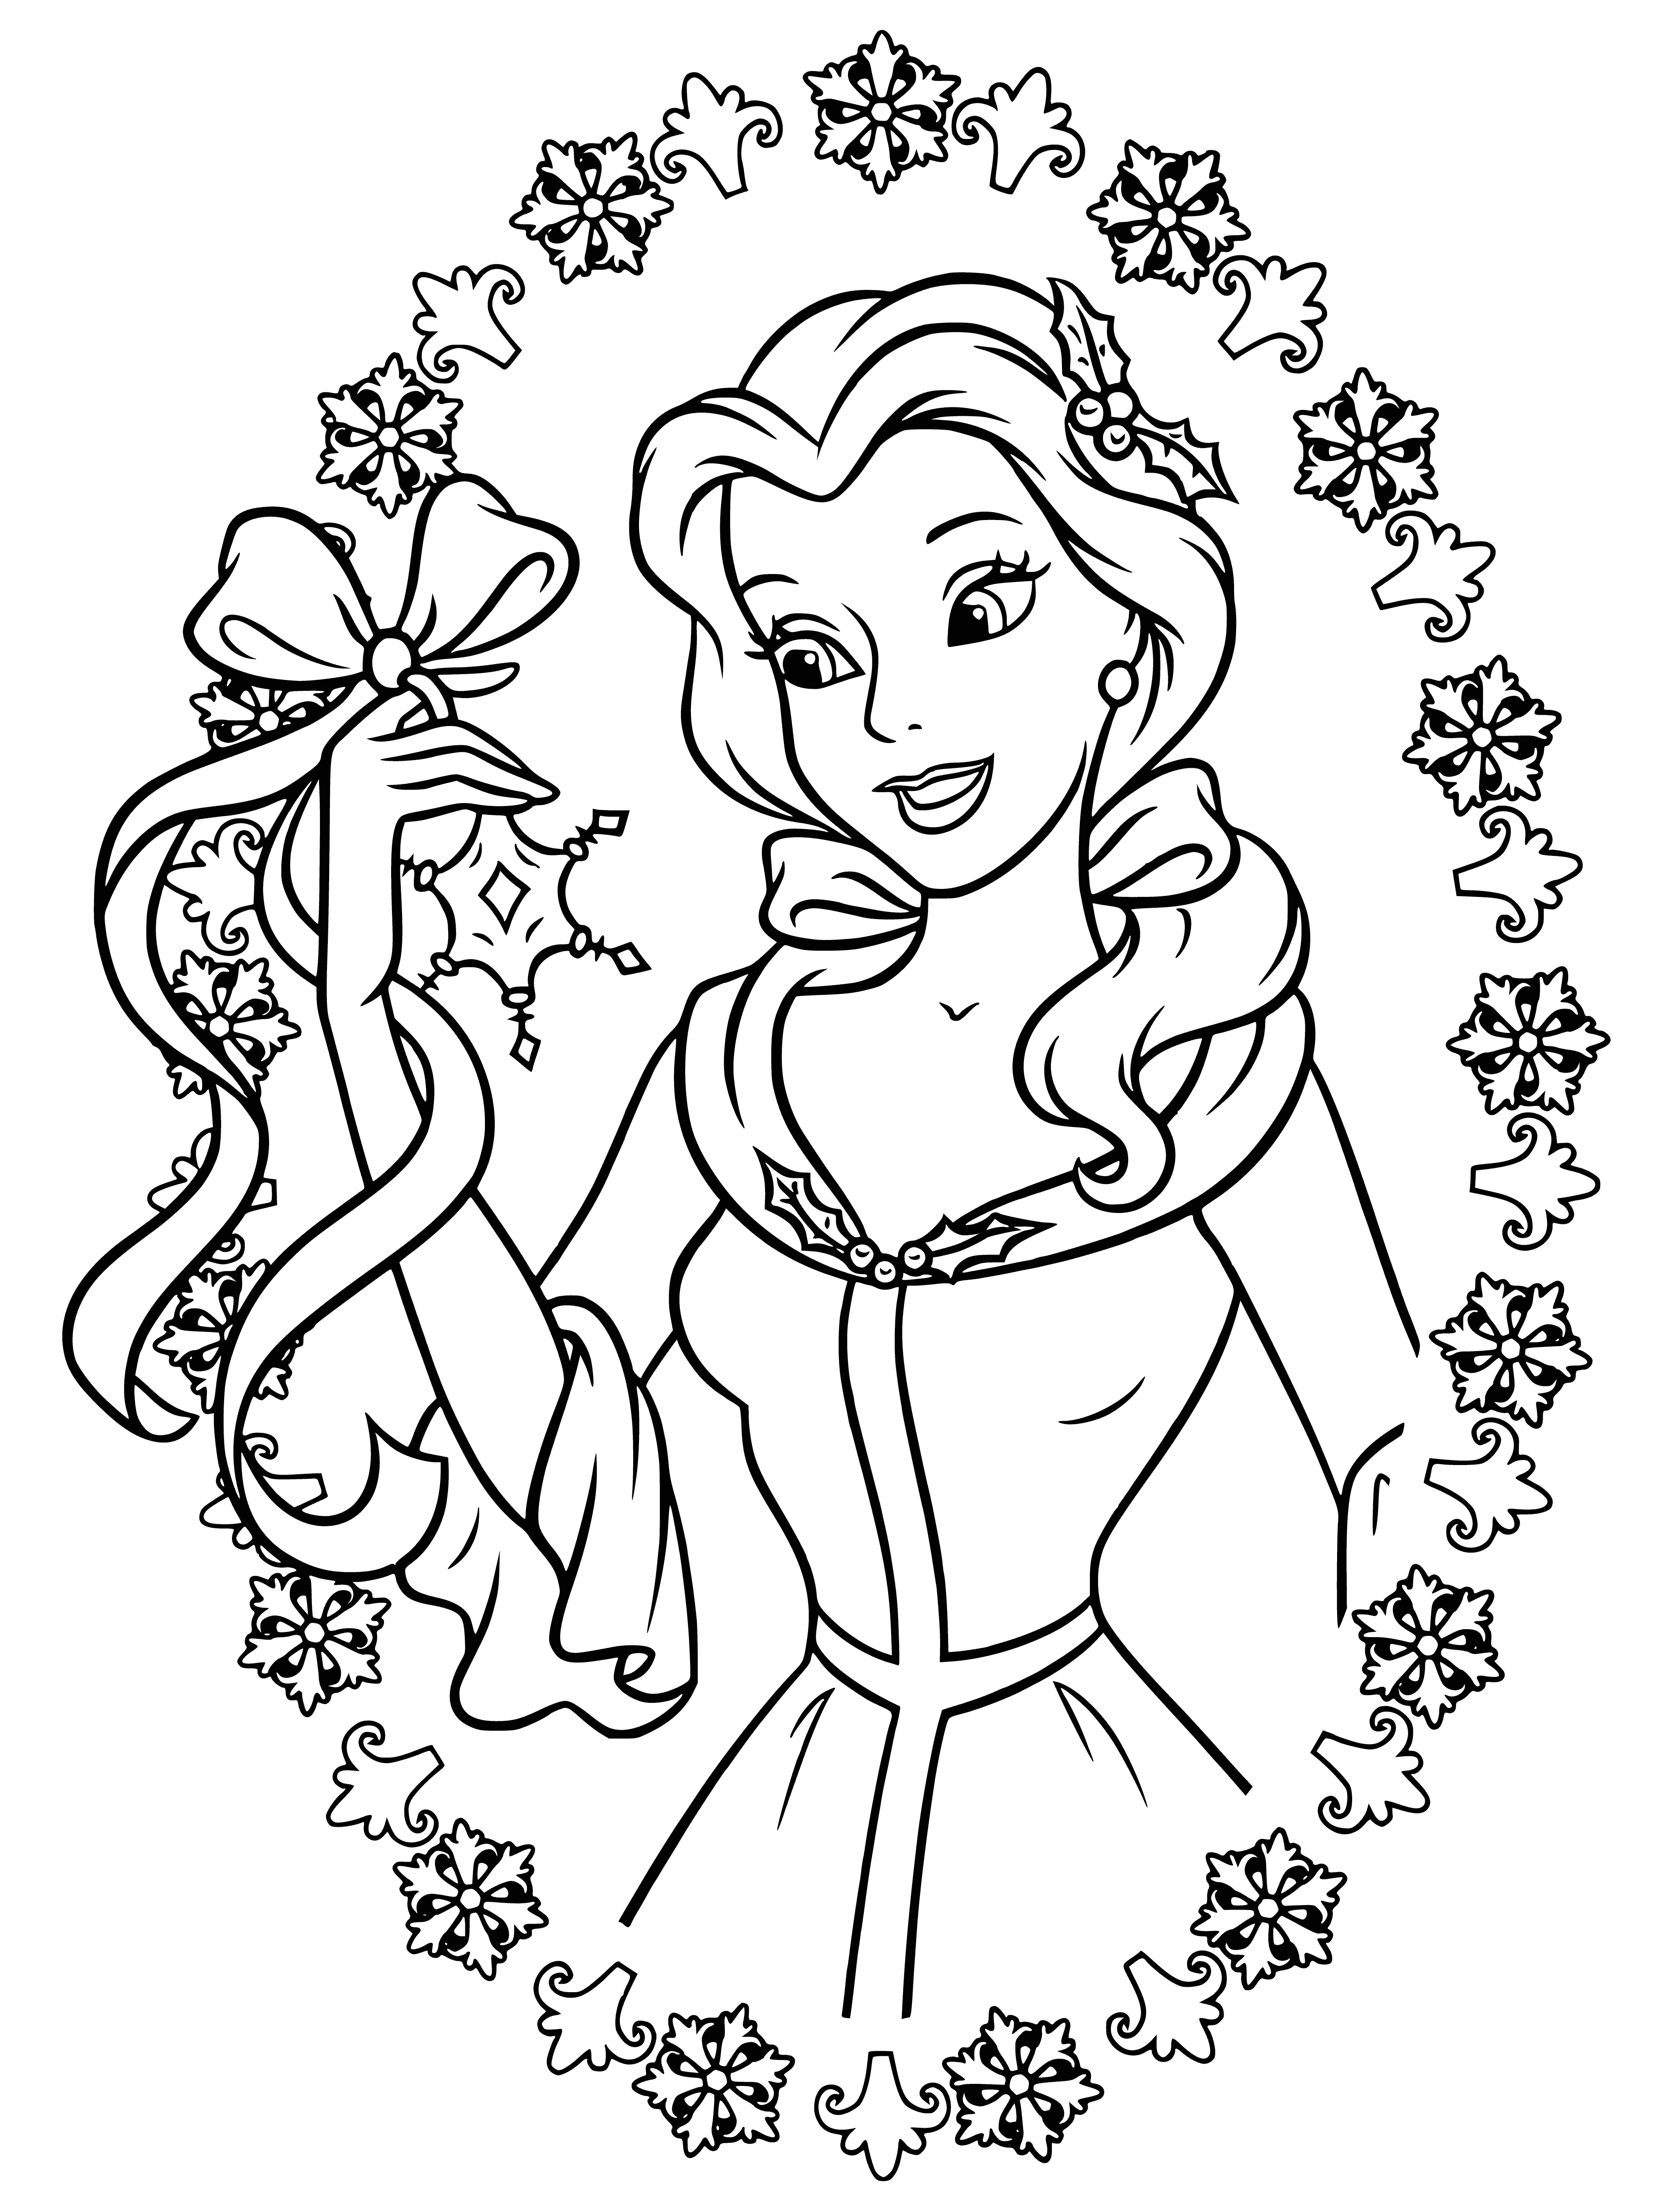 Belle with a snowflake coloring page